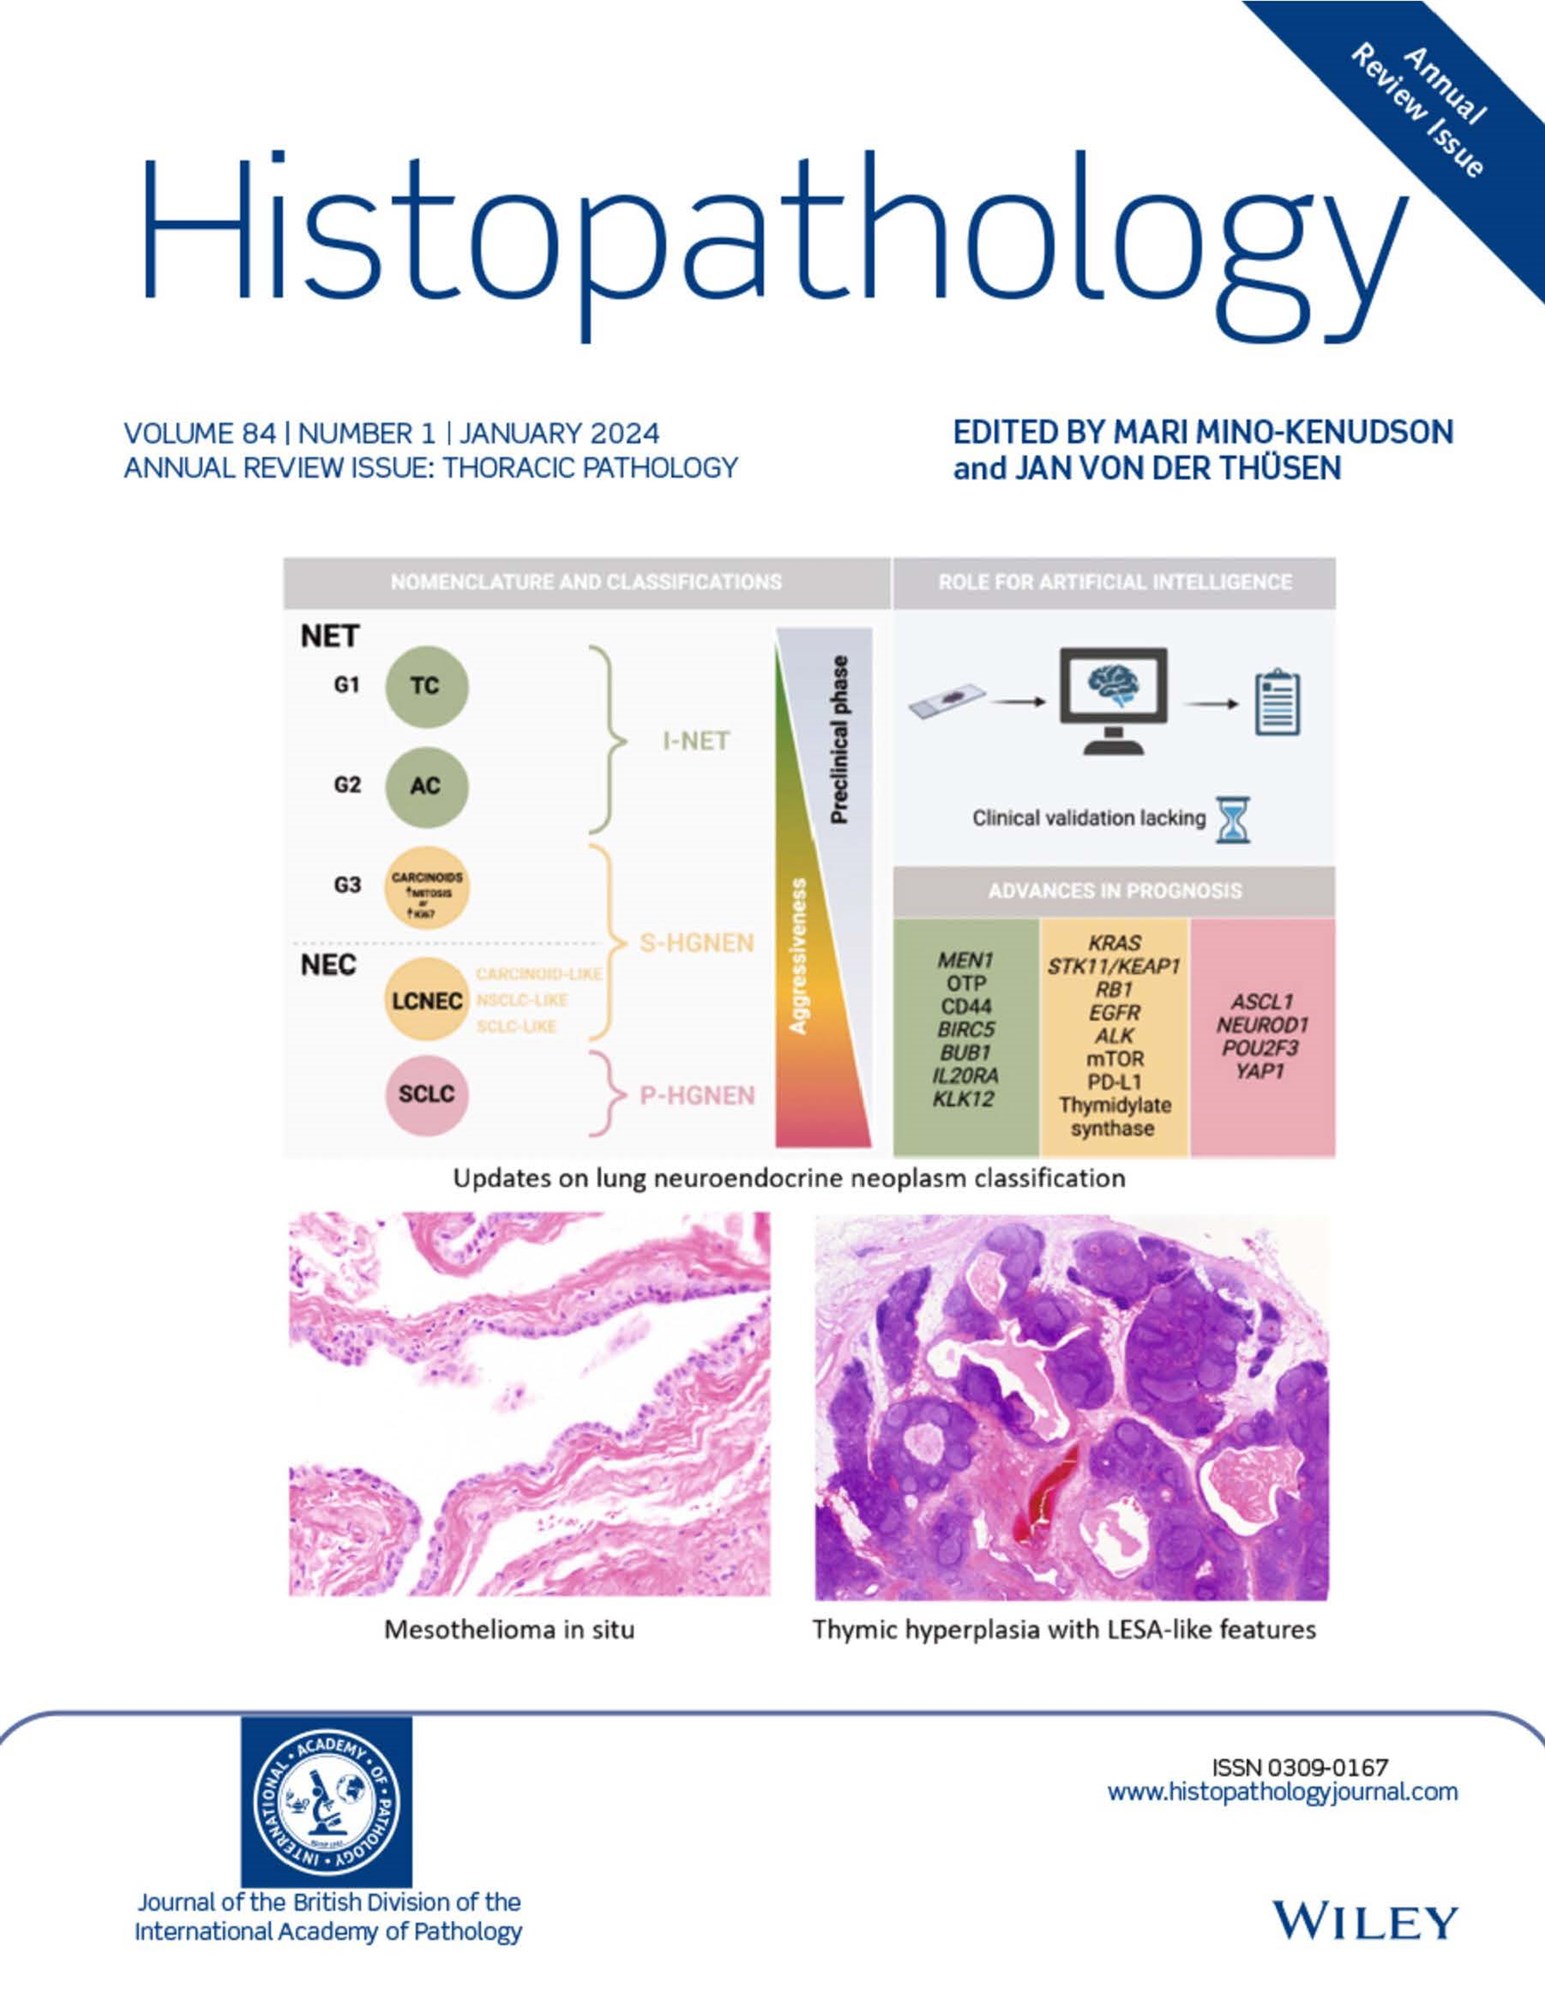 Histopathology Journal: Annual Review Issue Now Available image